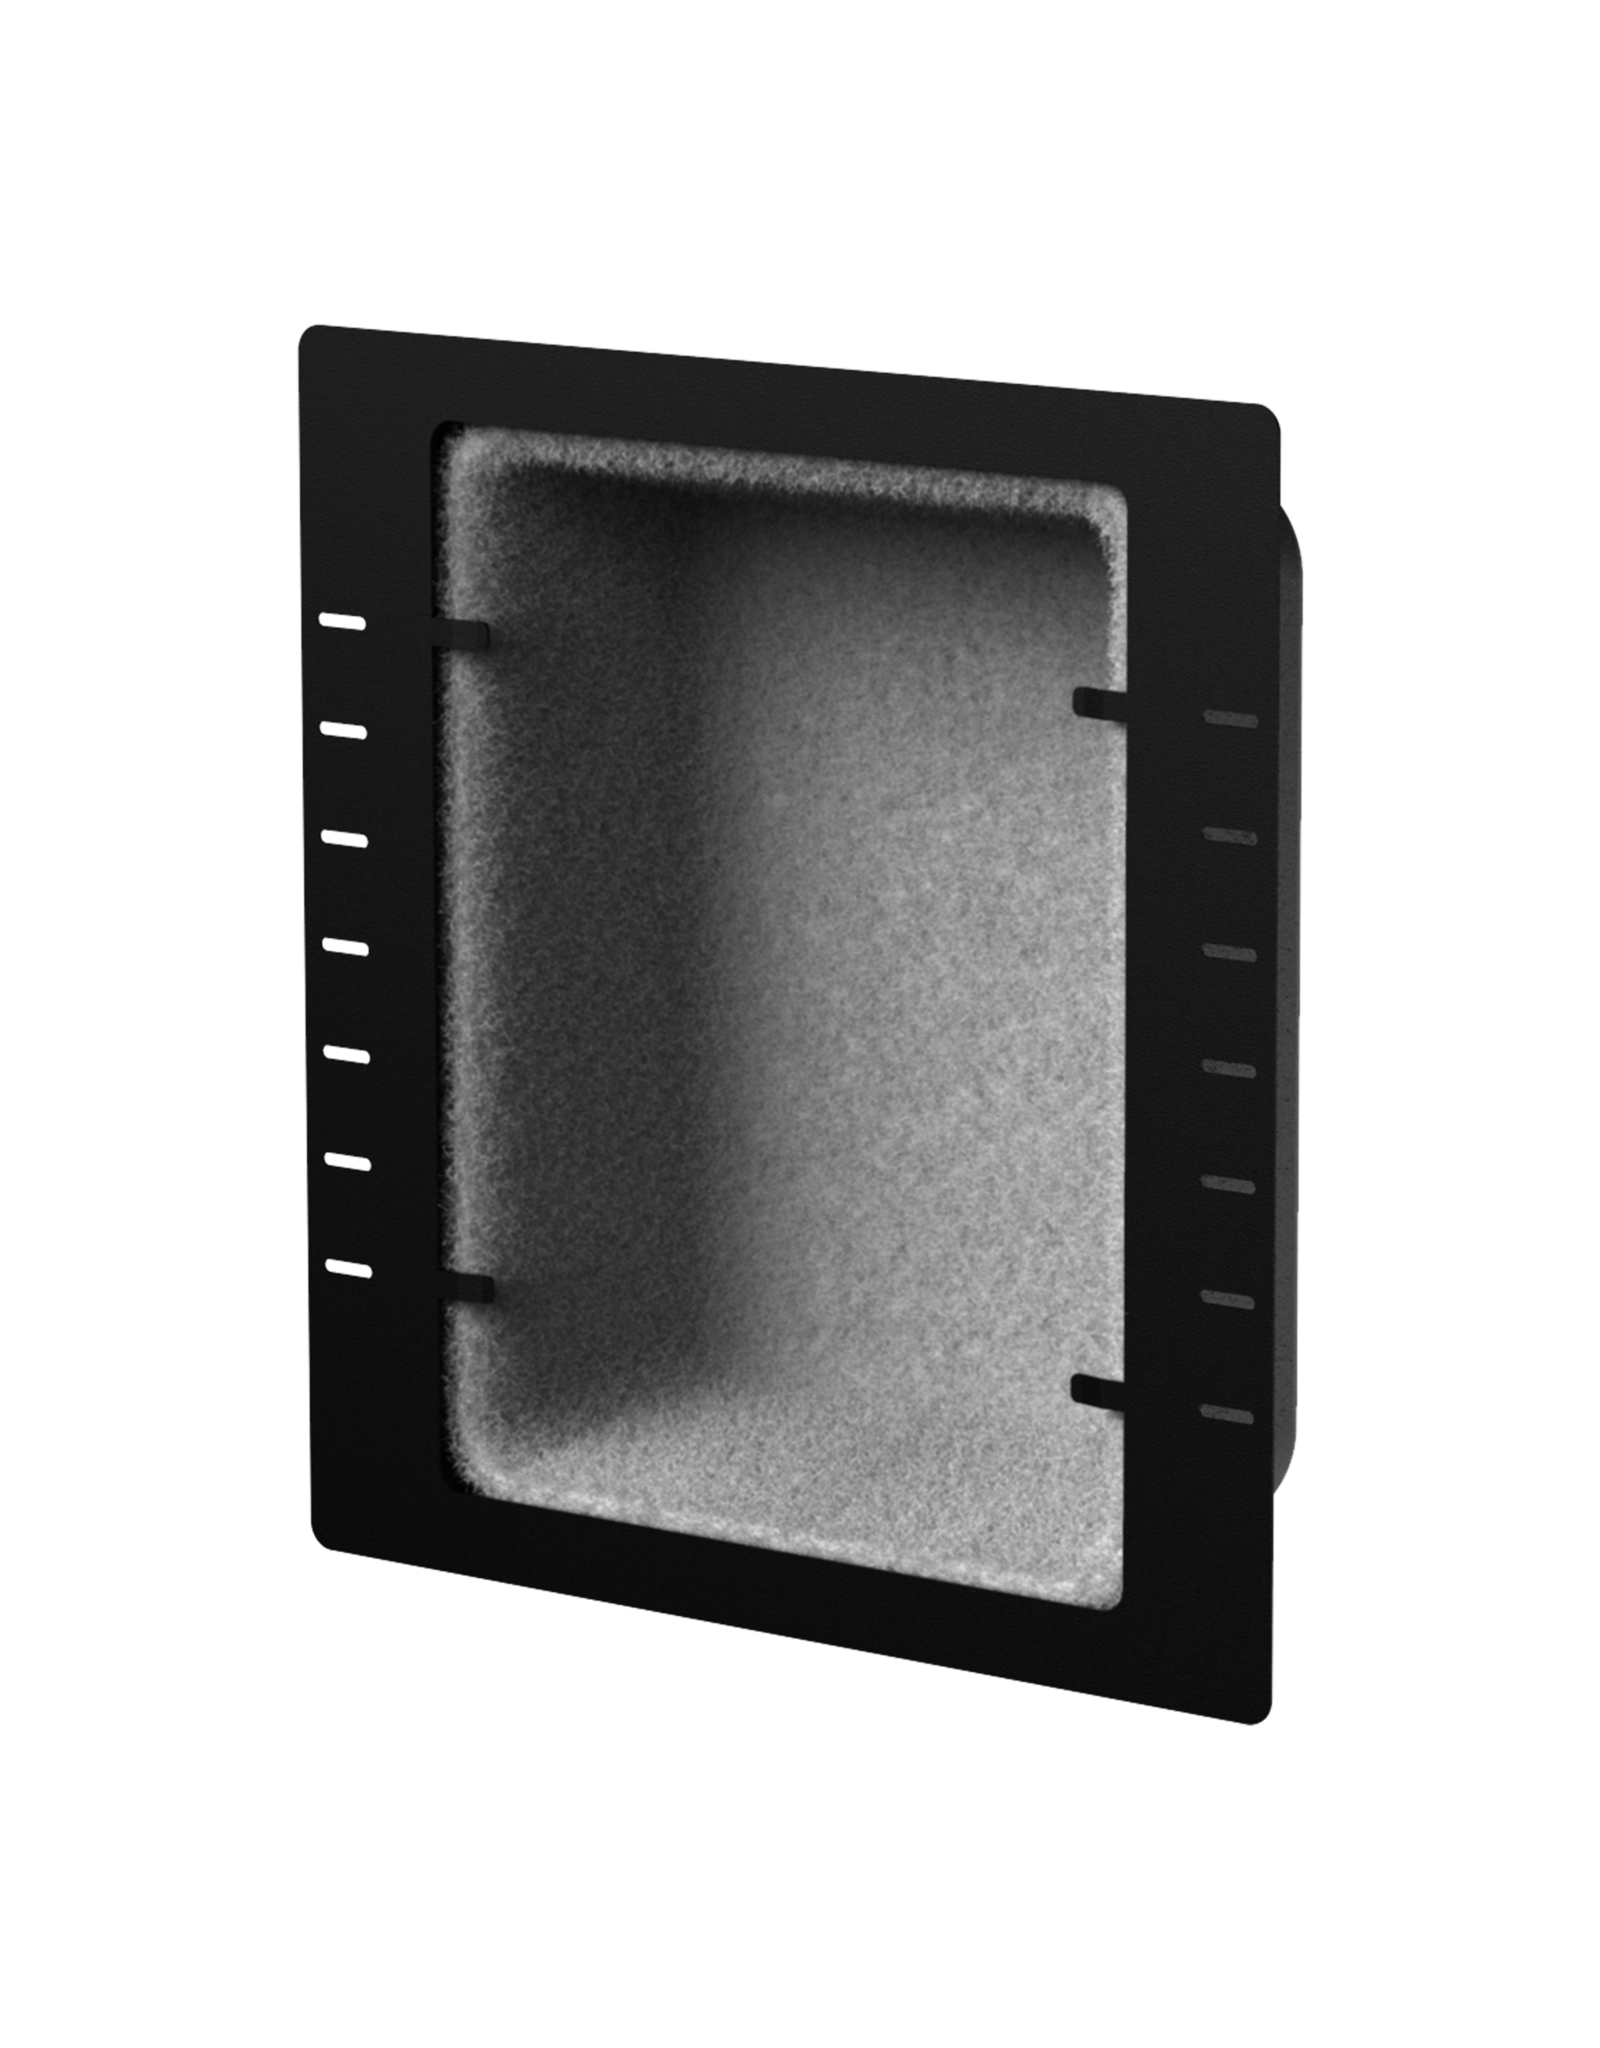 Audac Metal in ceiling/wall back box for flush mount speakers - Fire rated